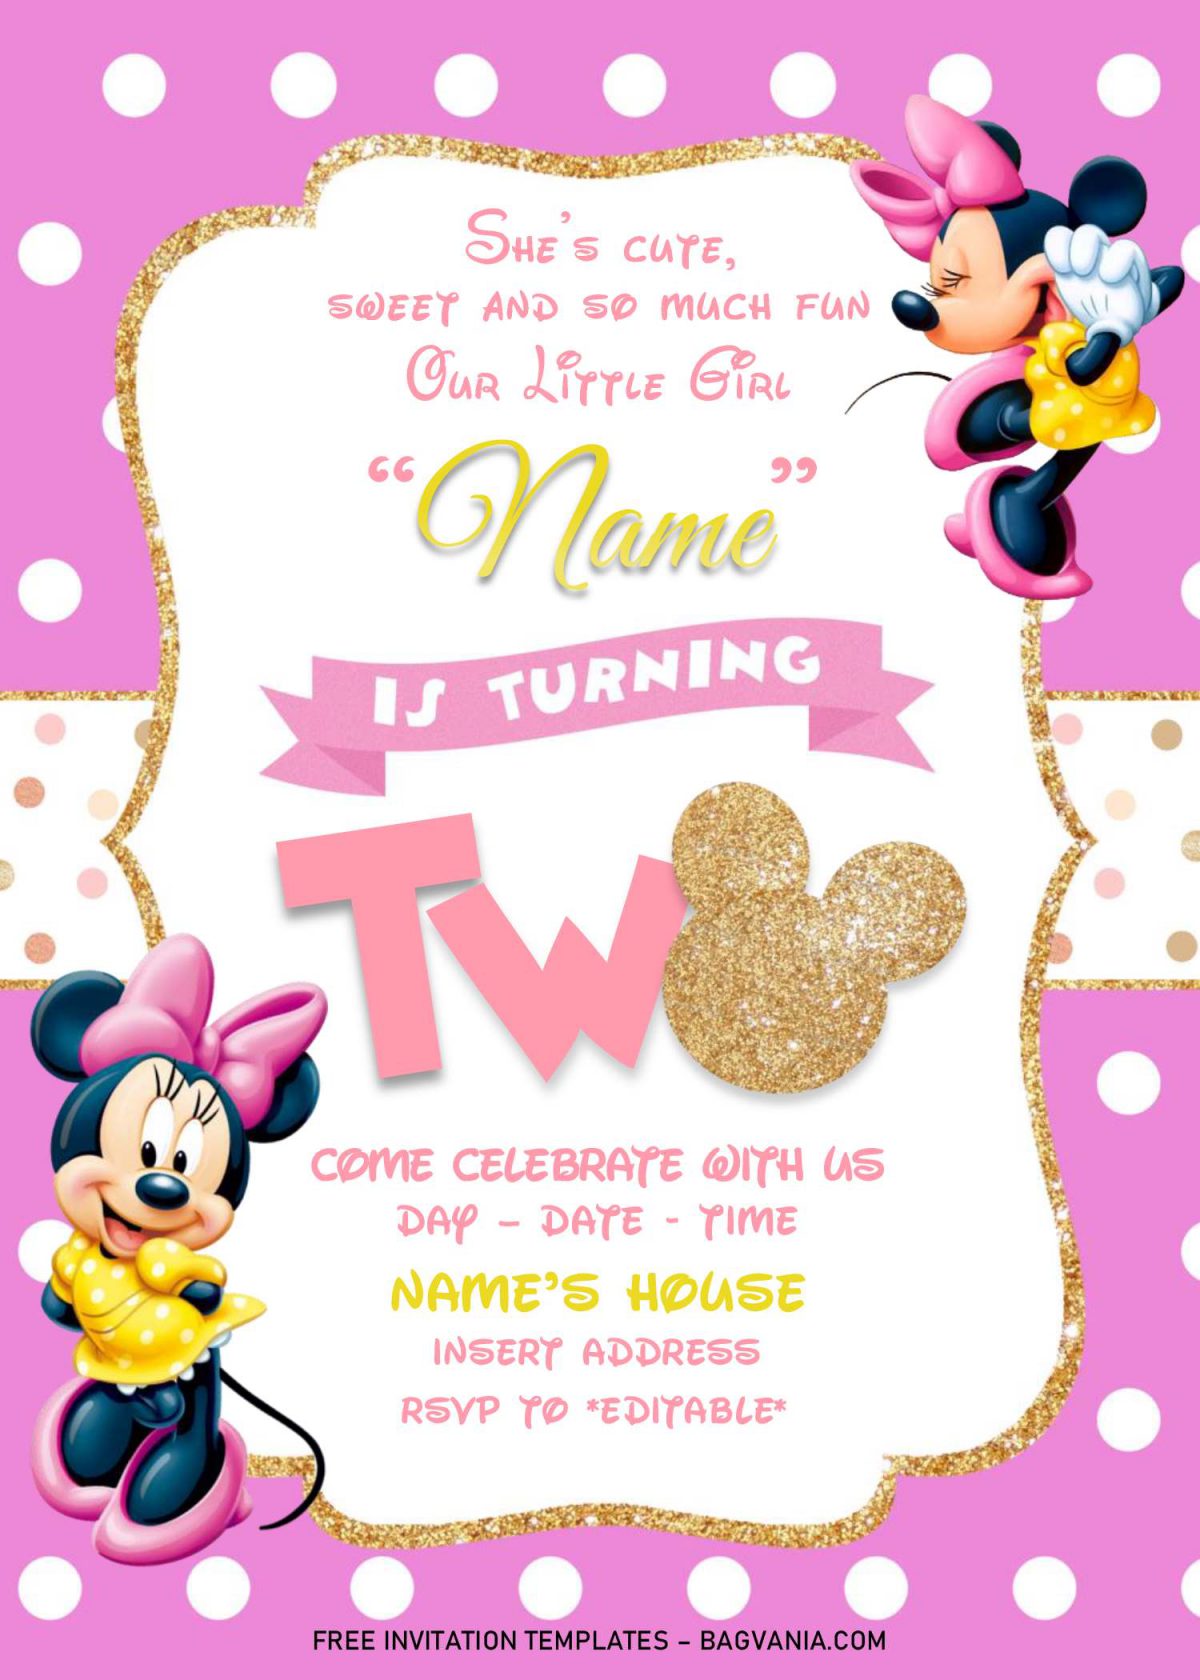 Gold Glitter Minnie Mouse Invitation Templates - Editable .Docx and has minnie in yellow dress